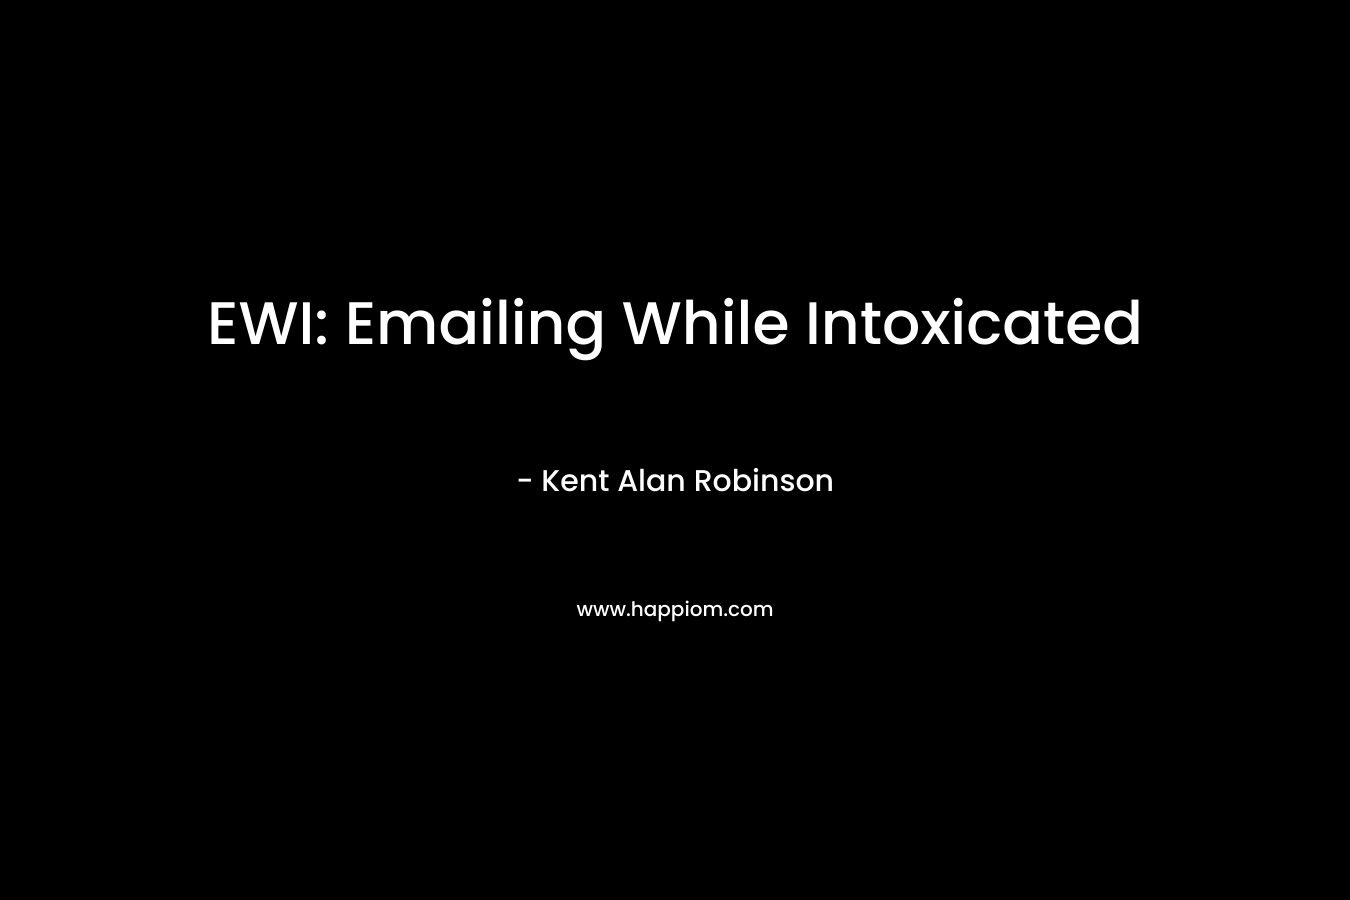 EWI: Emailing While Intoxicated